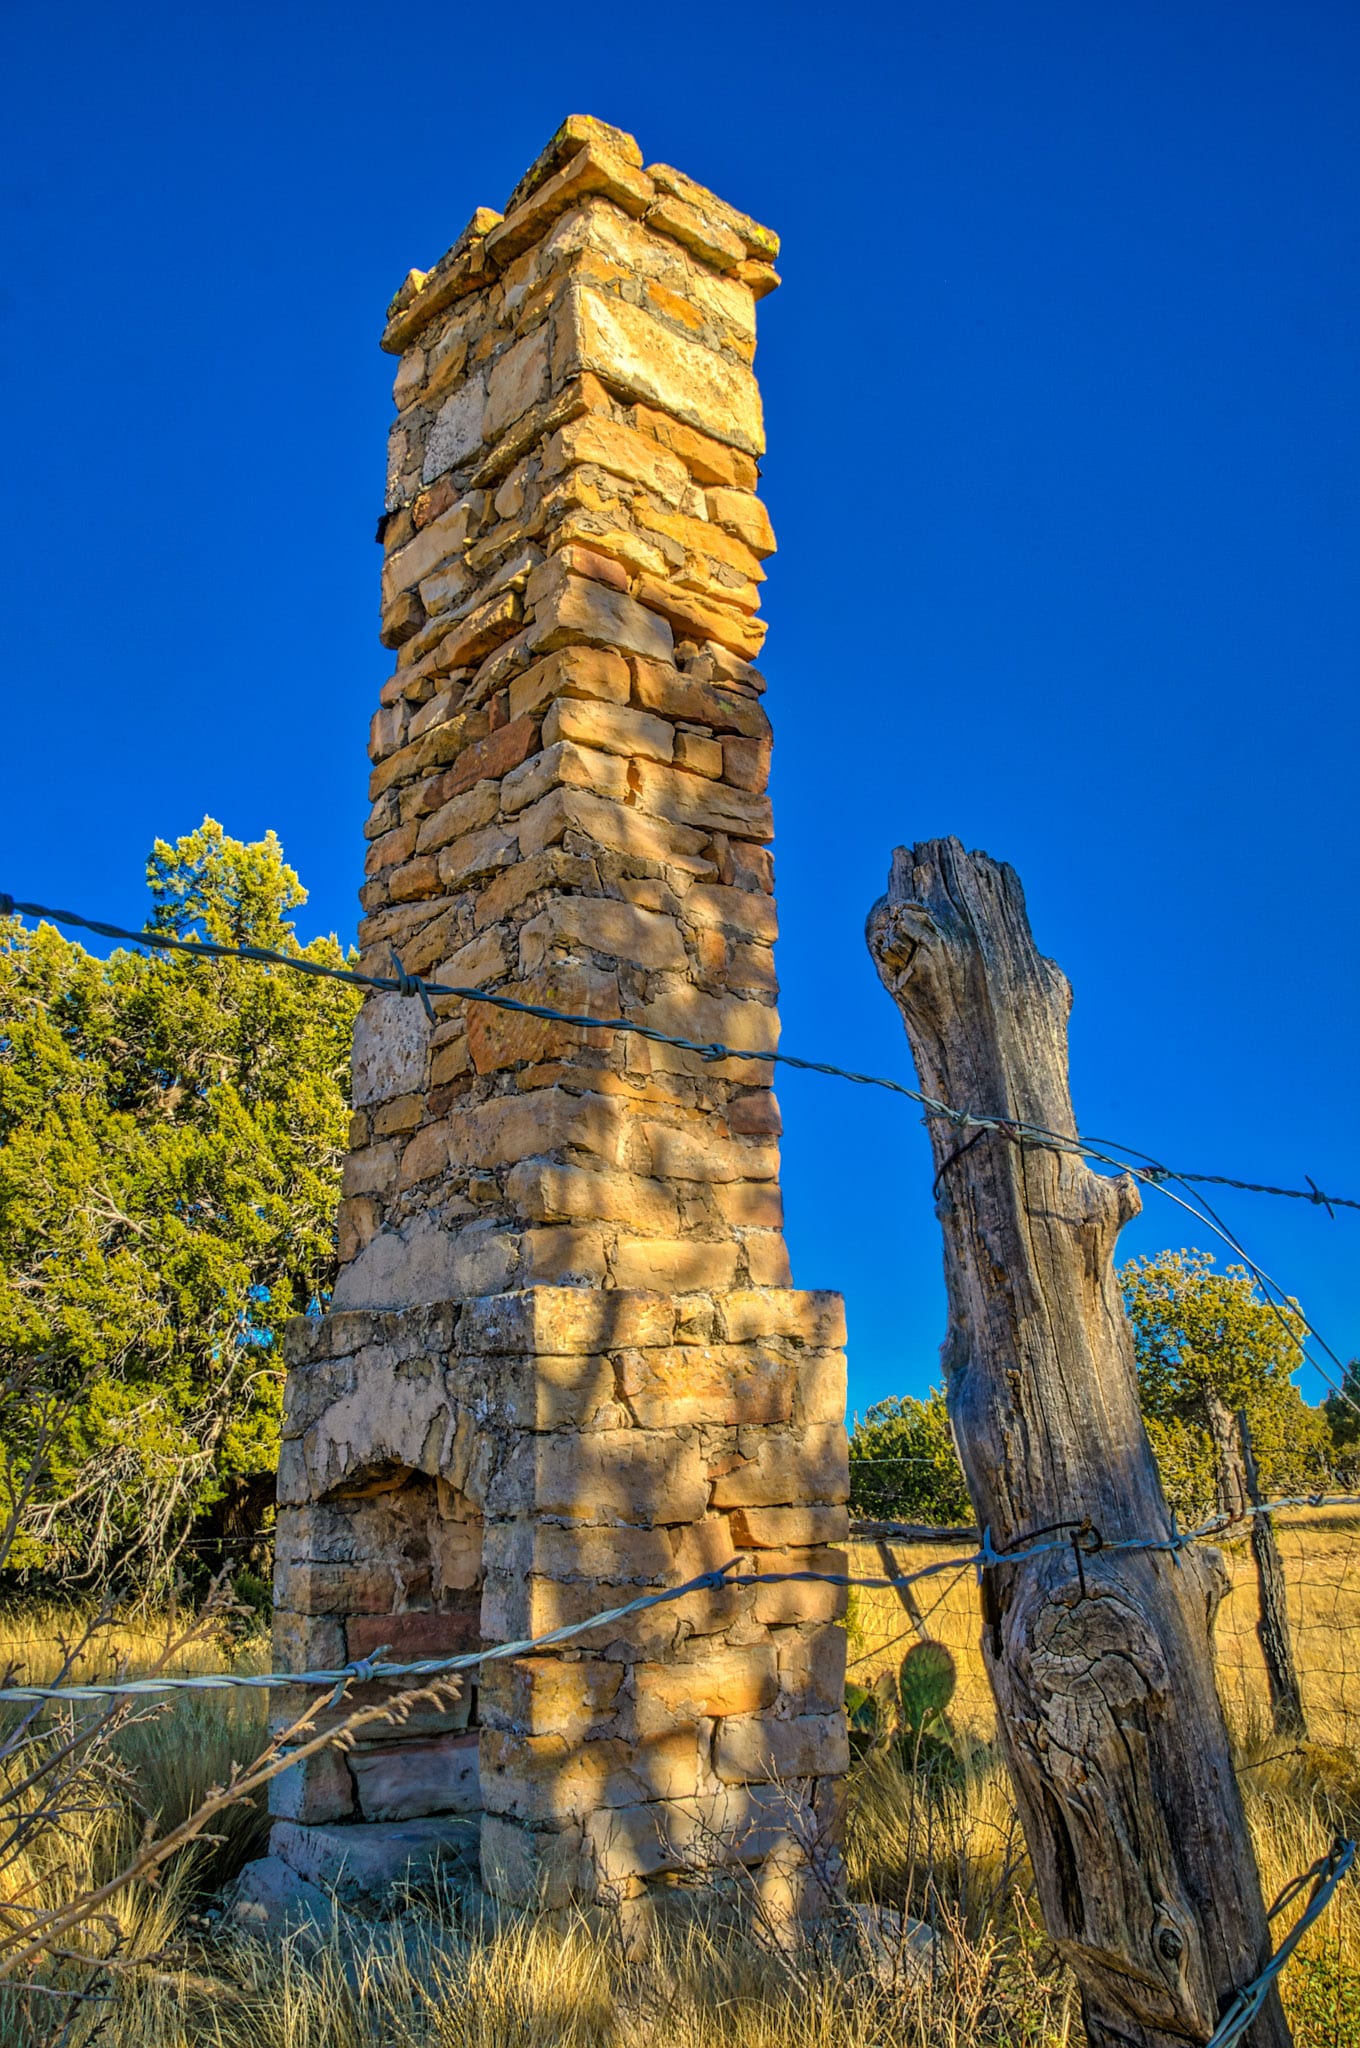 The remnants of a fireplace can be seen along the road near Queen, along County Road 137 in the Lincoln National Forest close to Carlsbad, New Mexico.